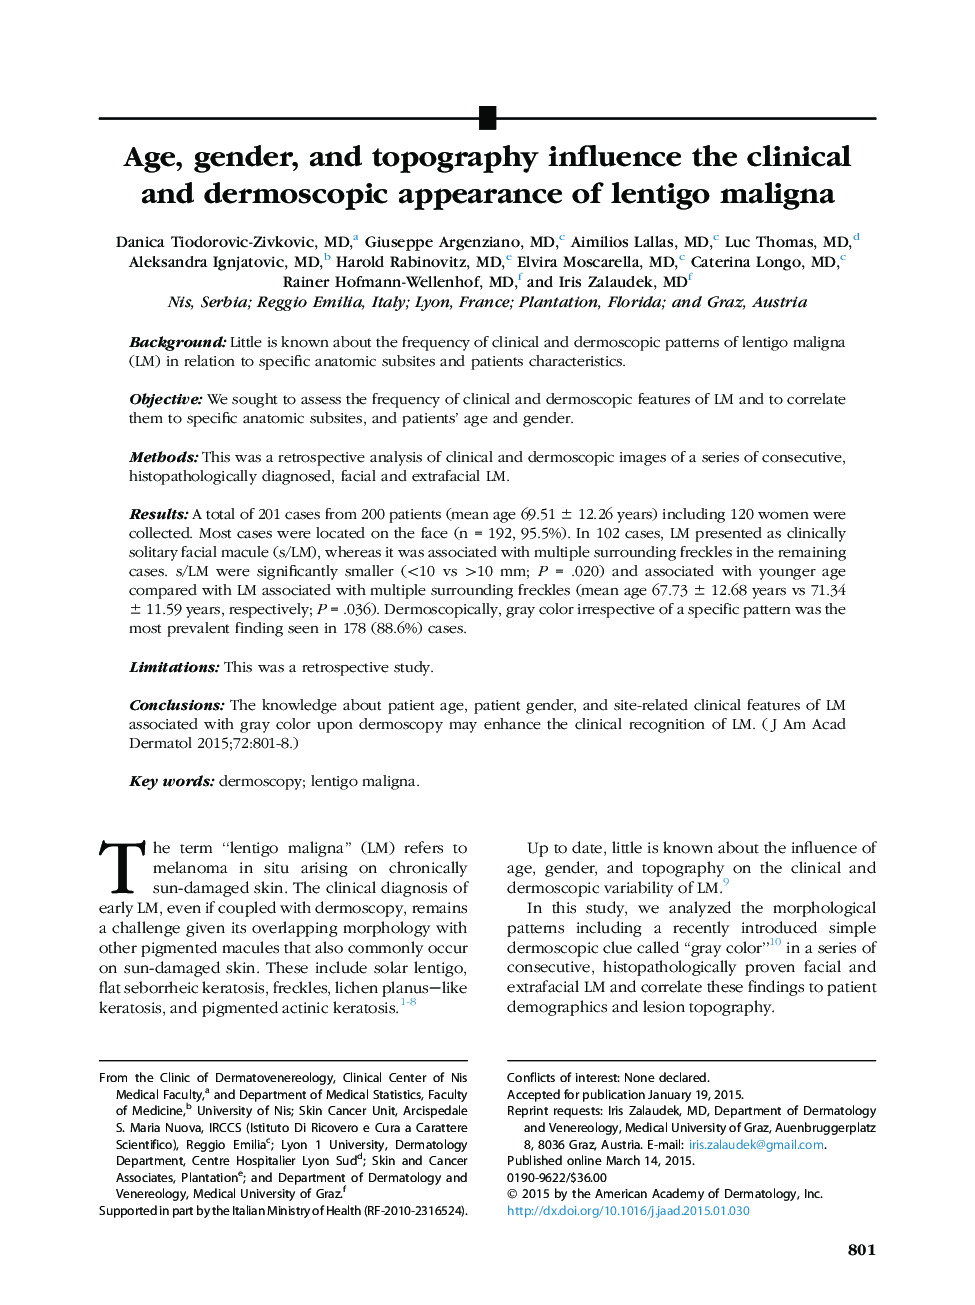 Age, gender, and topography influence the clinical and dermoscopic appearance of lentigo maligna 